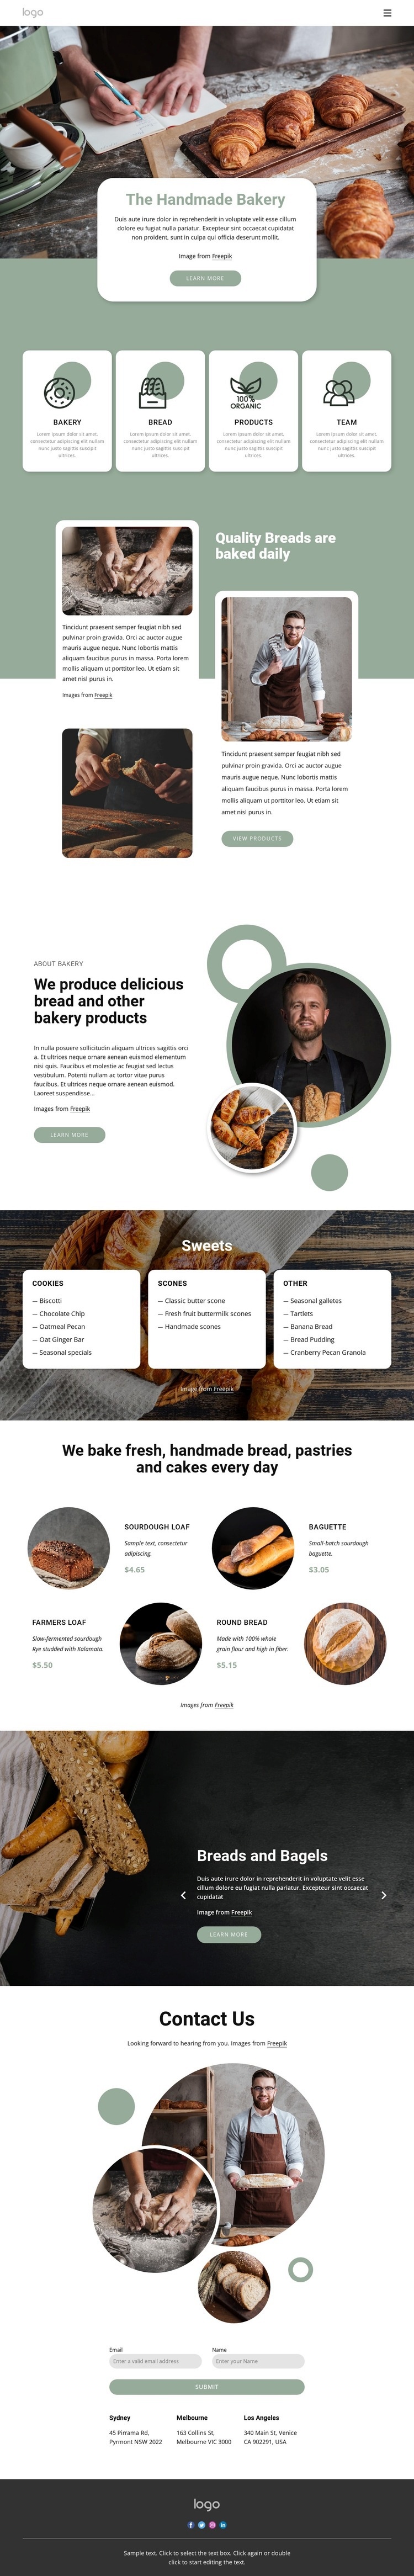 The handmade bakery Web Page Design